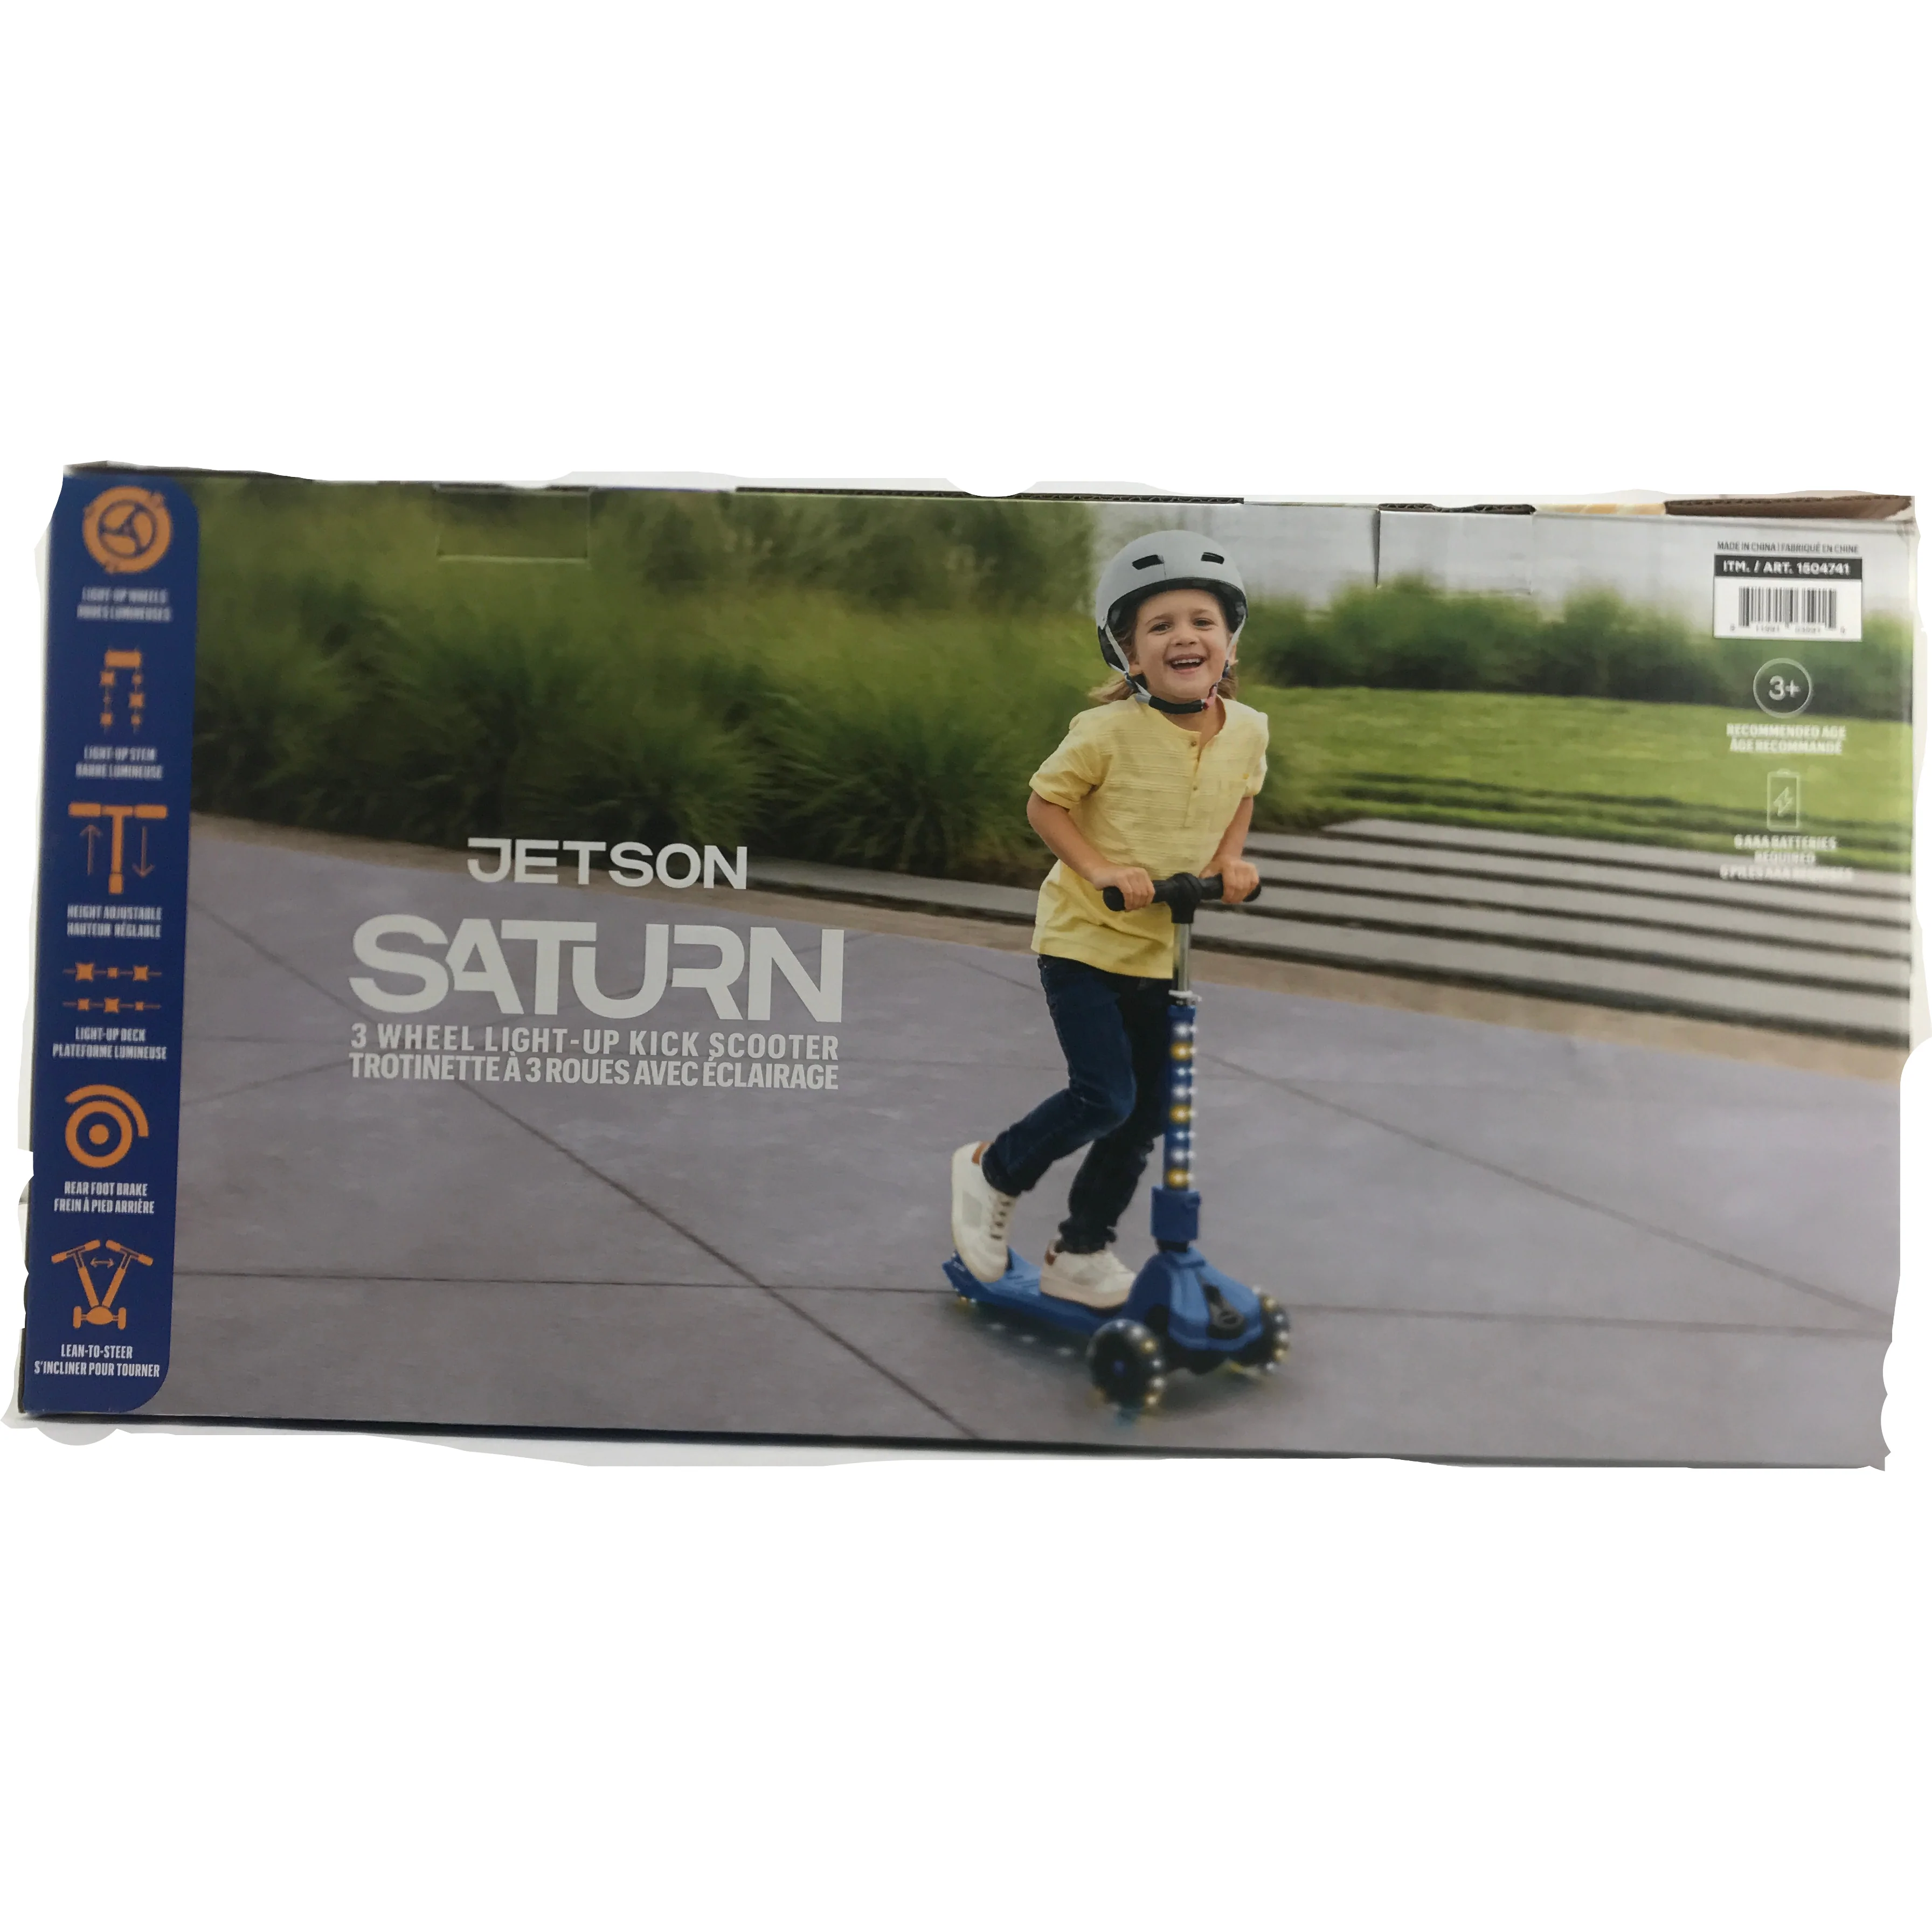 Jetson Saturn 3 Wheel Scooter: Light Up Scooter / Kick Scooter / Blue / 3+